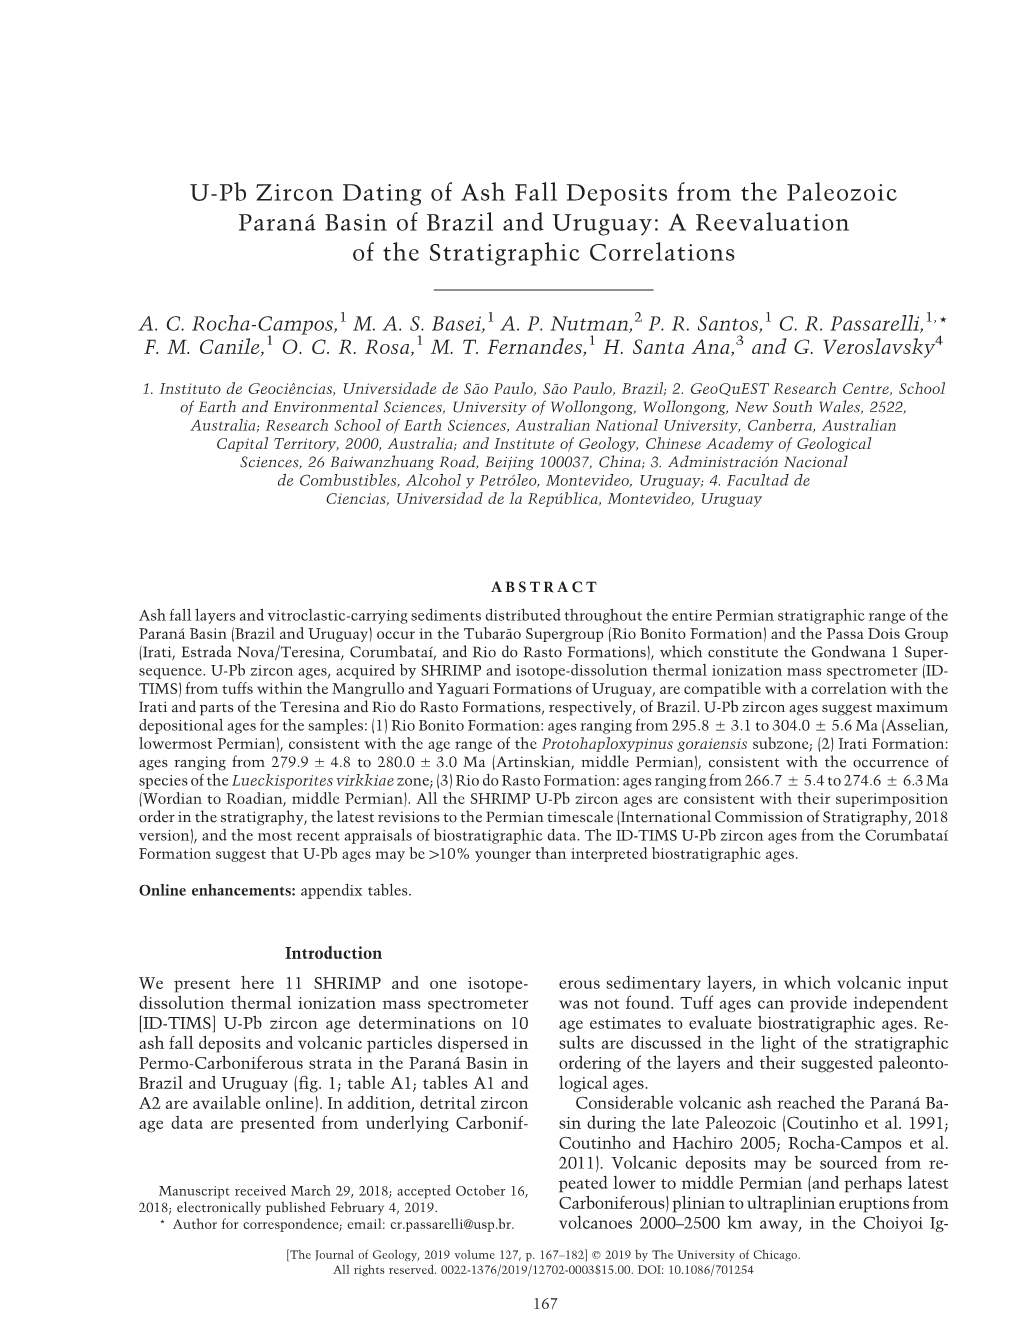 U-Pb Zircon Dating of Ash Fall Deposits from the Paleozoic Paraná Basin of Brazil and Uruguay: a Reevaluation of the Stratigraphic Correlations